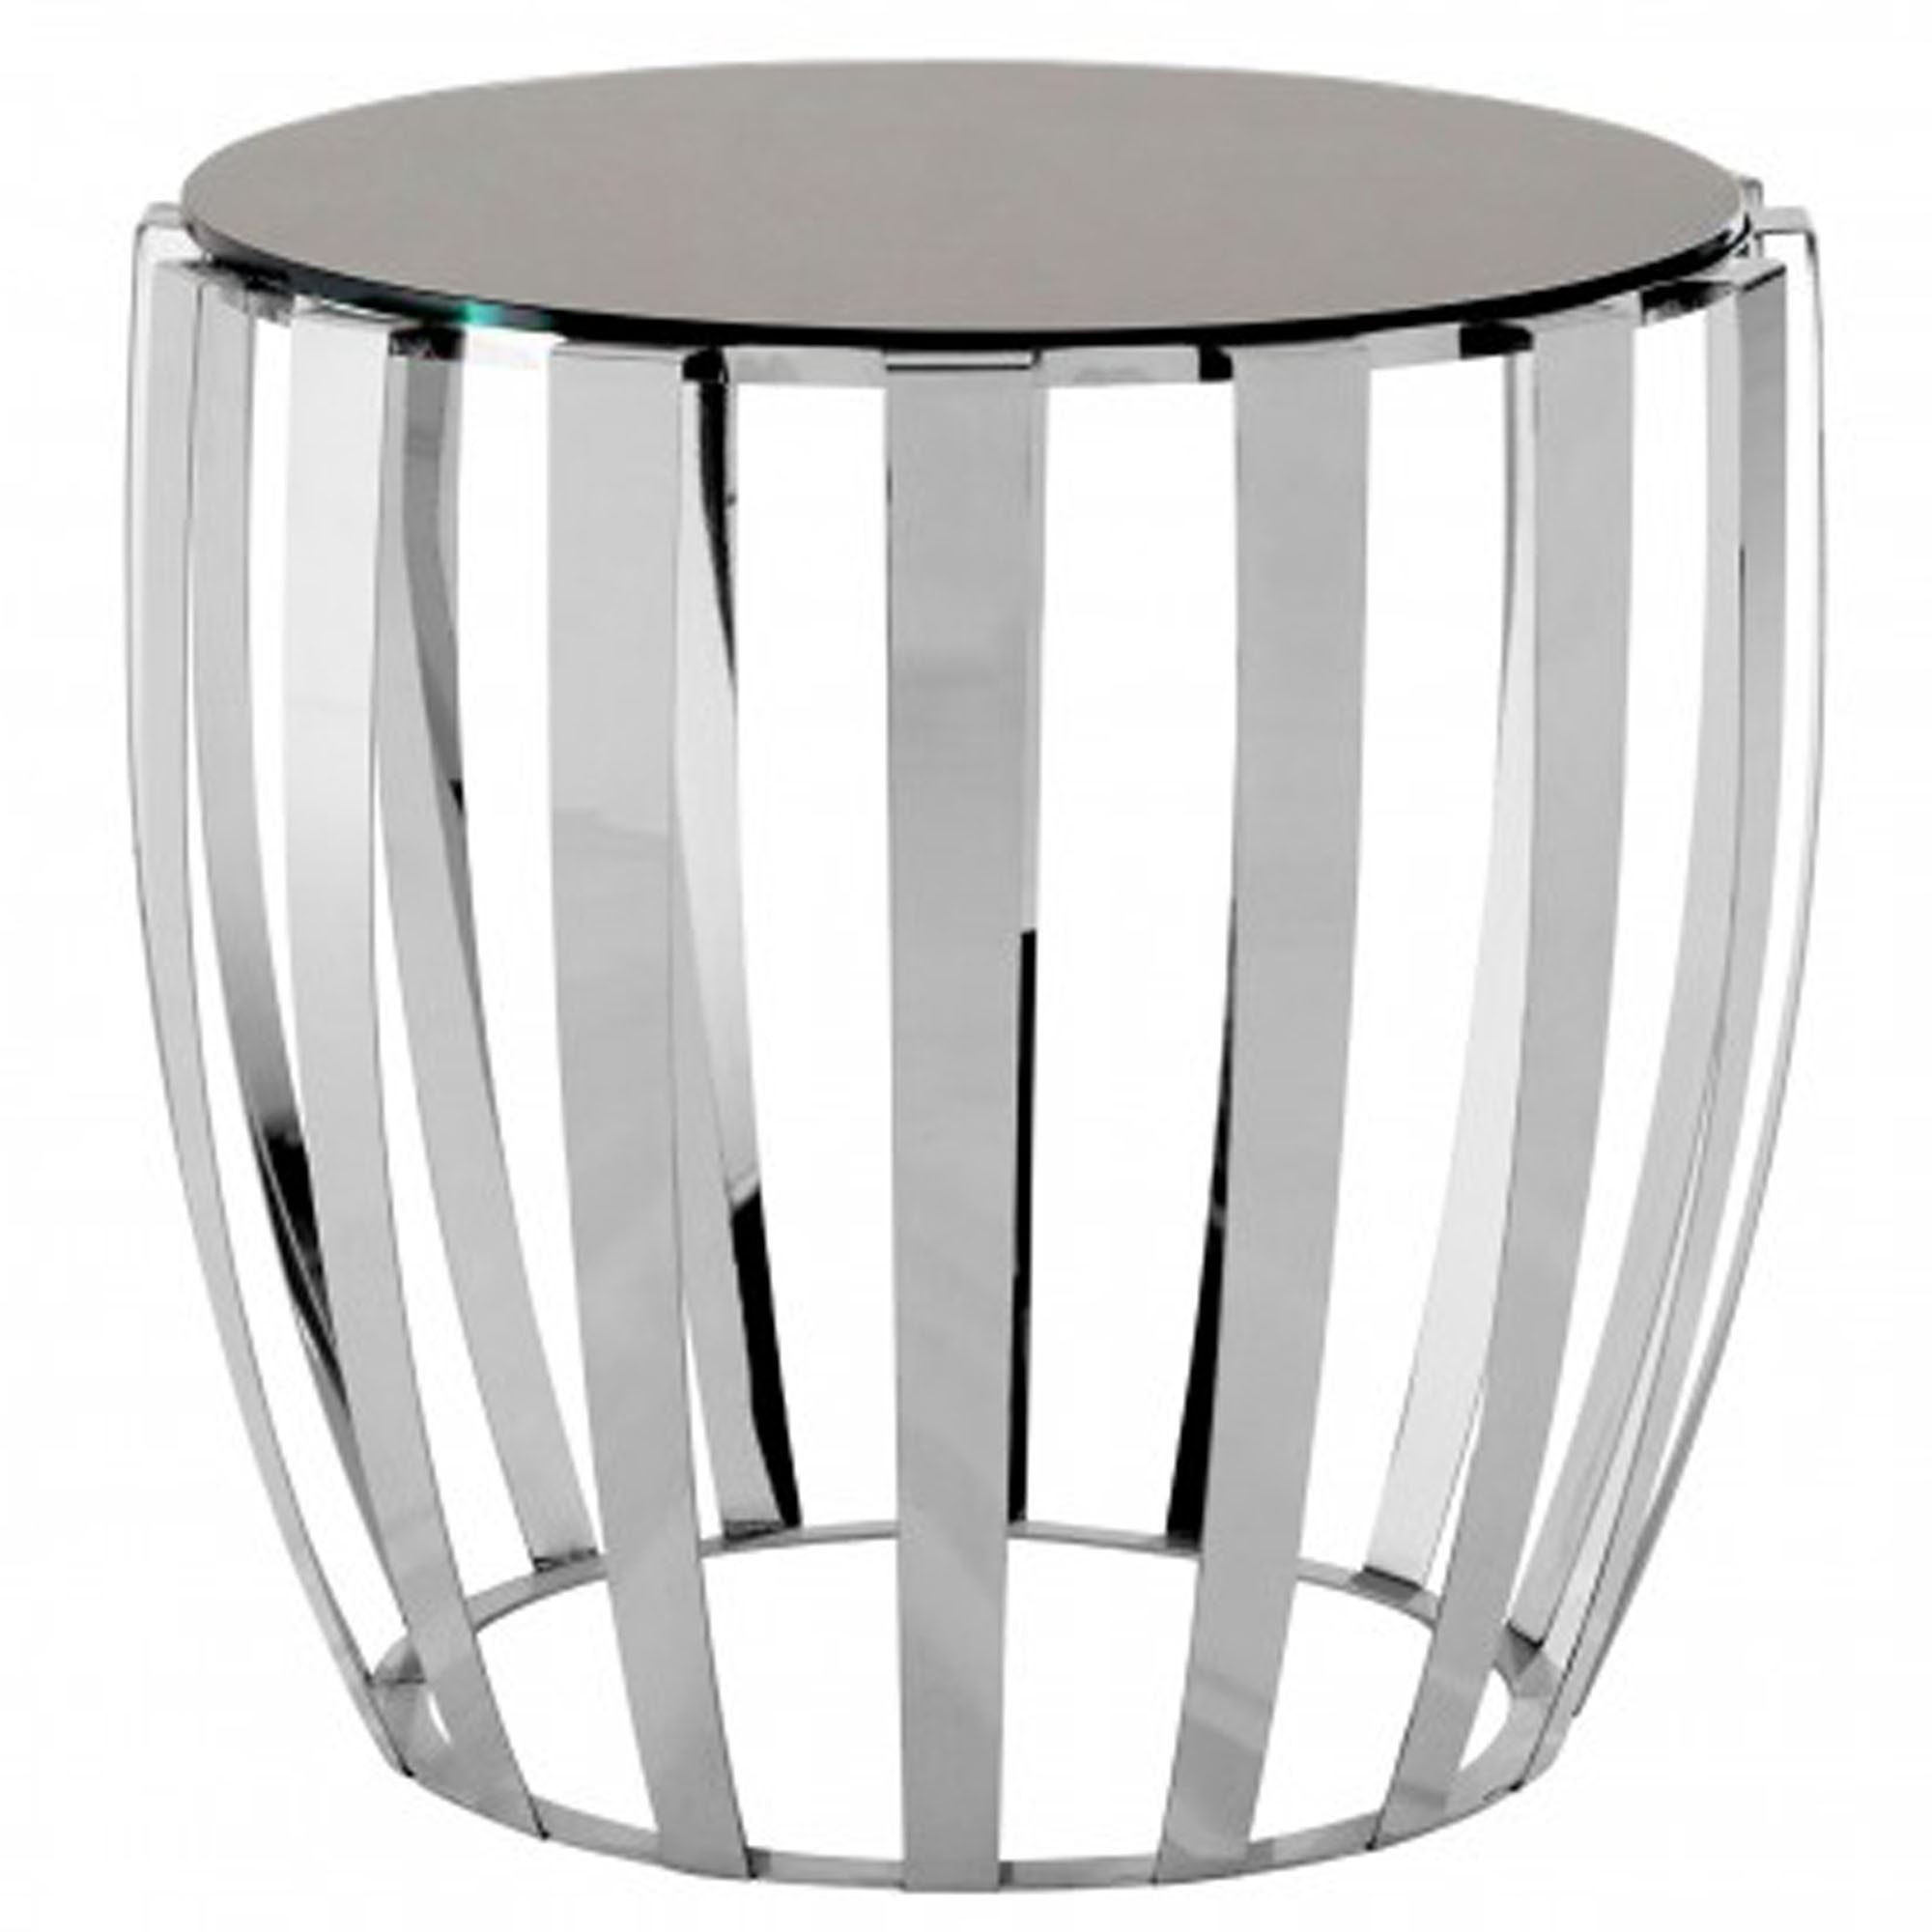 Yasmin Stainless Steel Side Table | Modern Furniture Inside Silver Stainless Steel Coffee Tables (View 6 of 15)